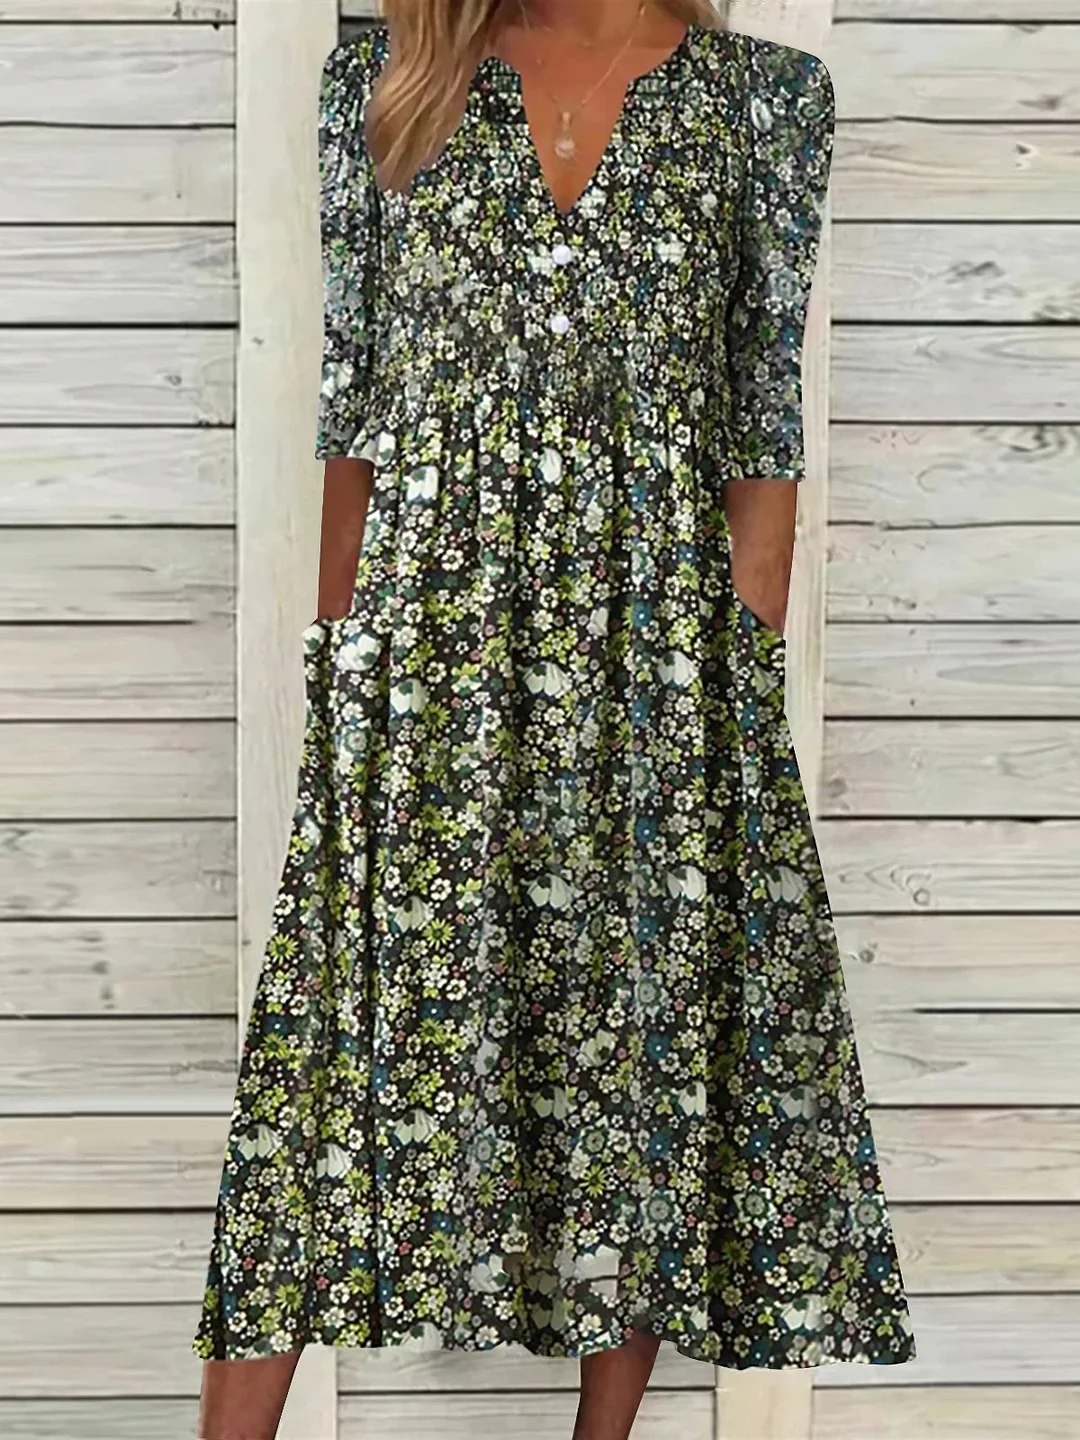 Casual Short Sleeve Woven V Neck Floral Midi Dress | IFYHOME